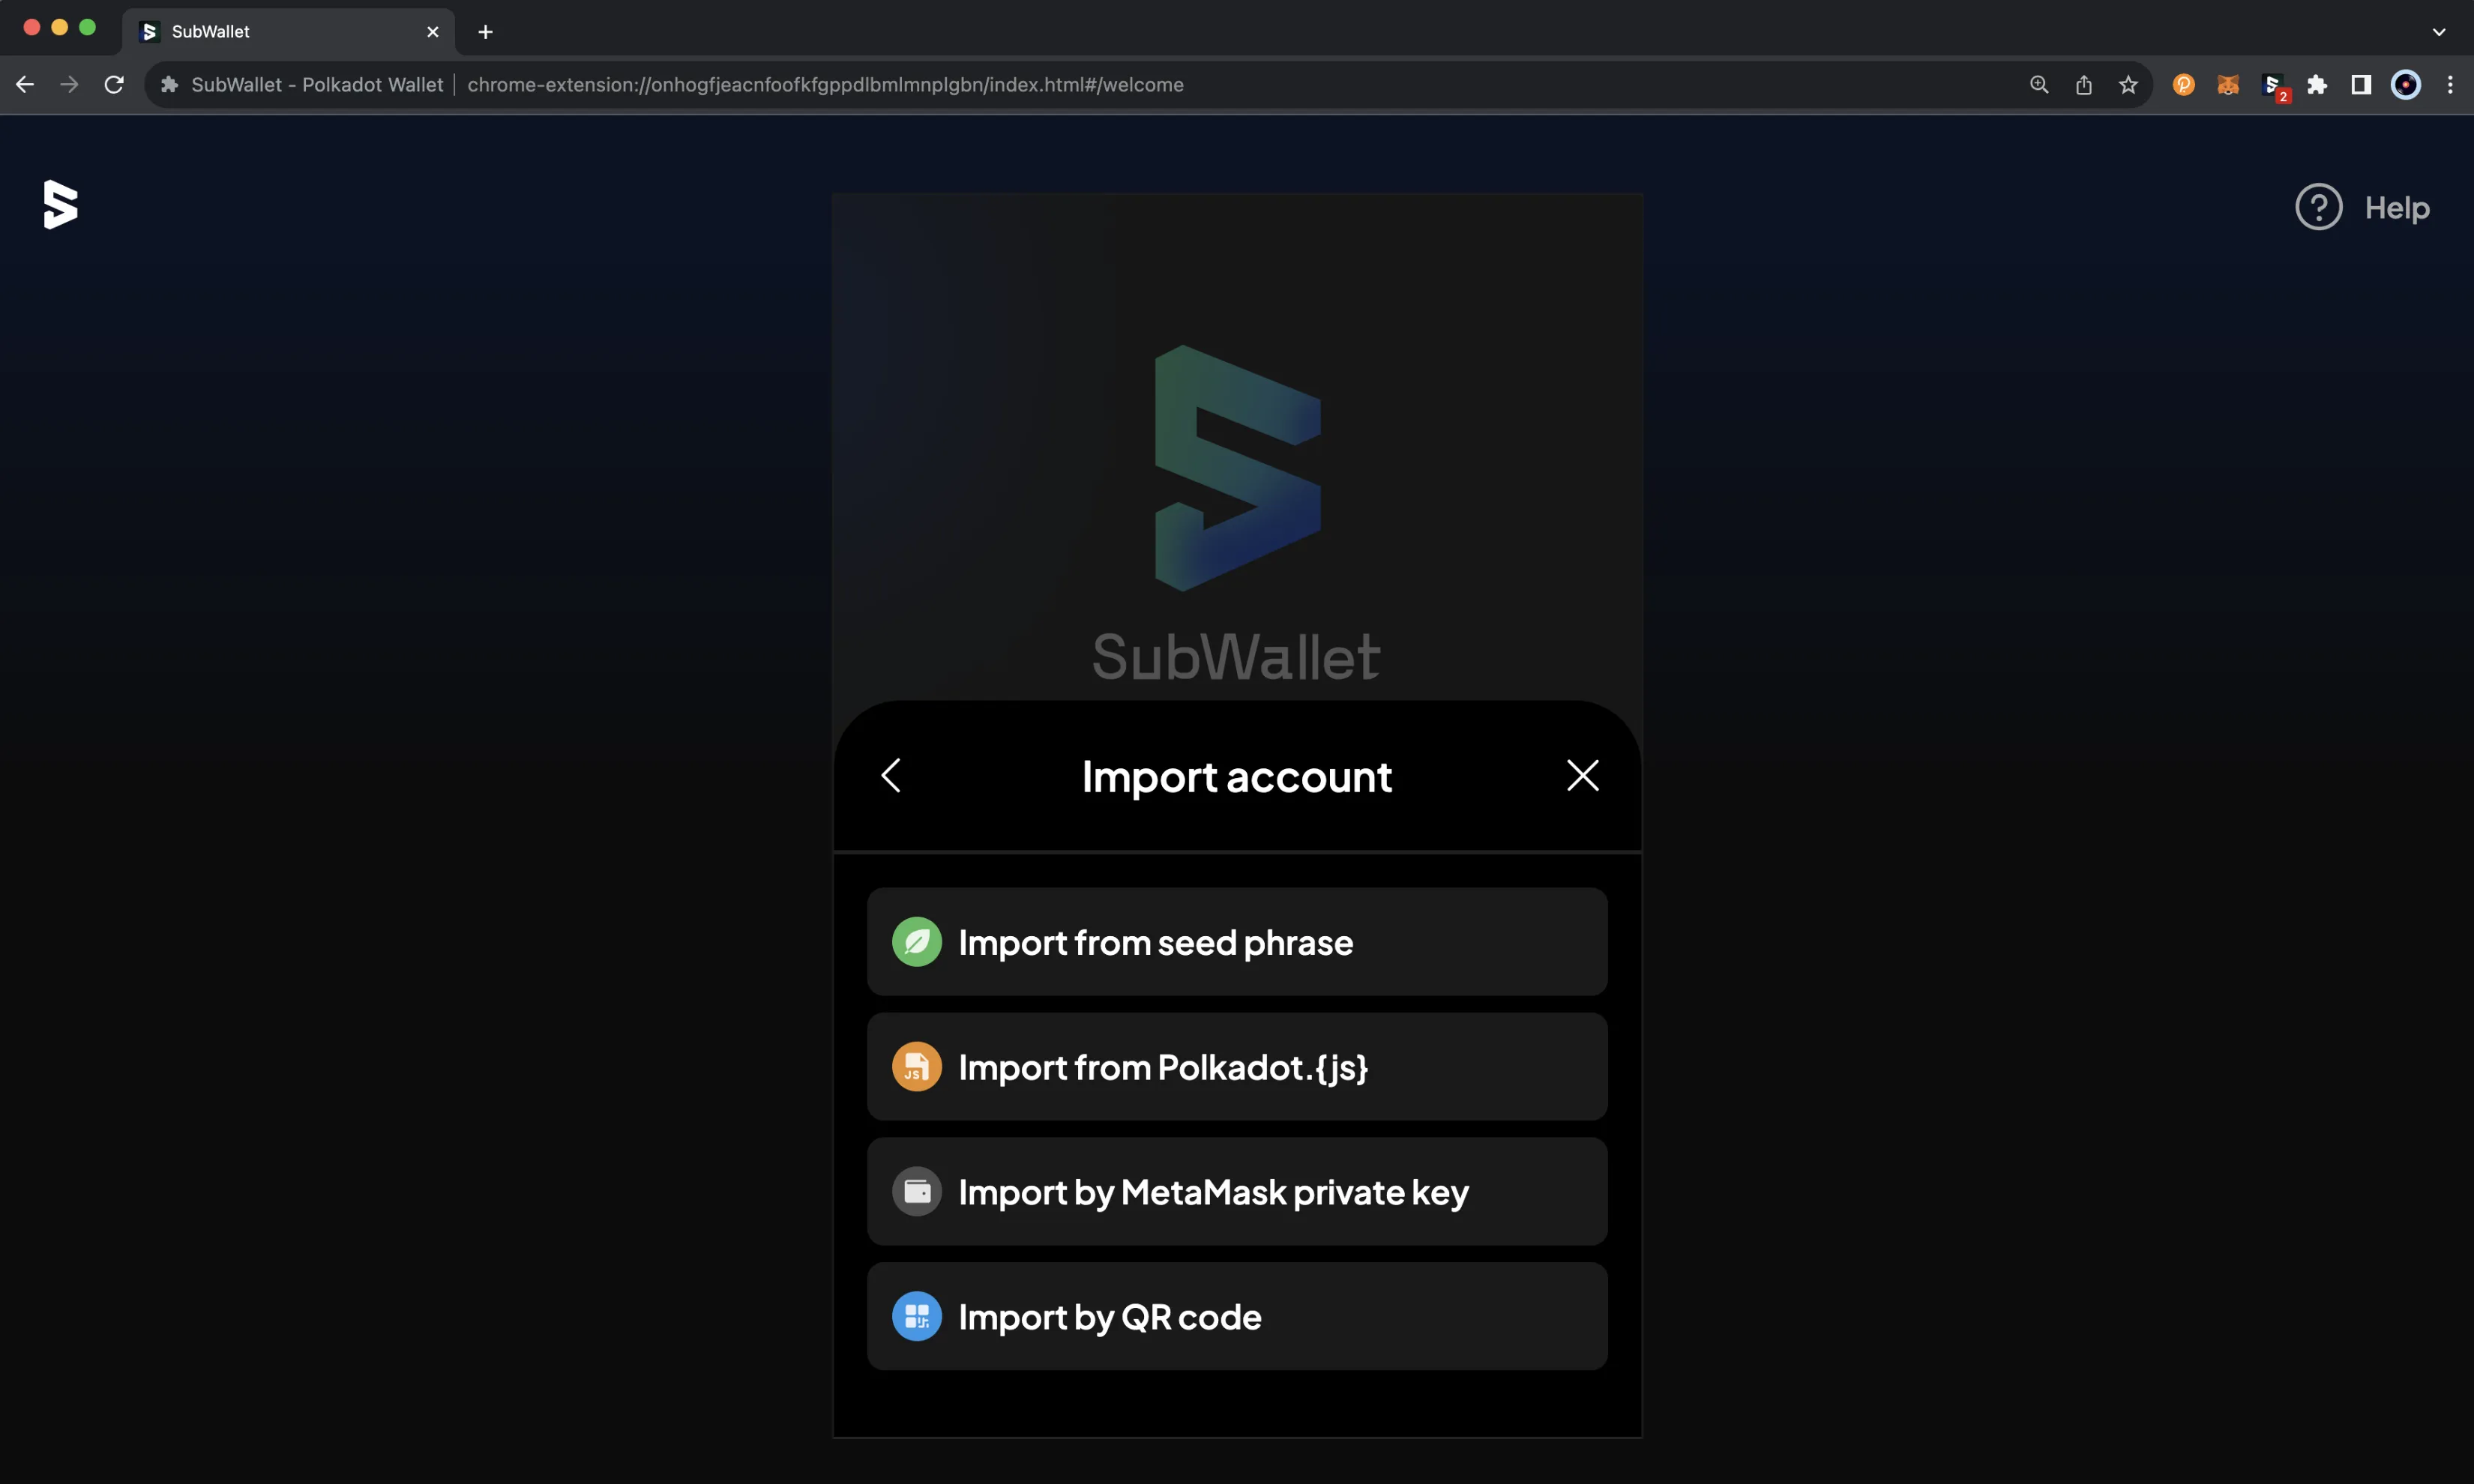 Select the import option from the Import account screen of the SubWallet browser extension.